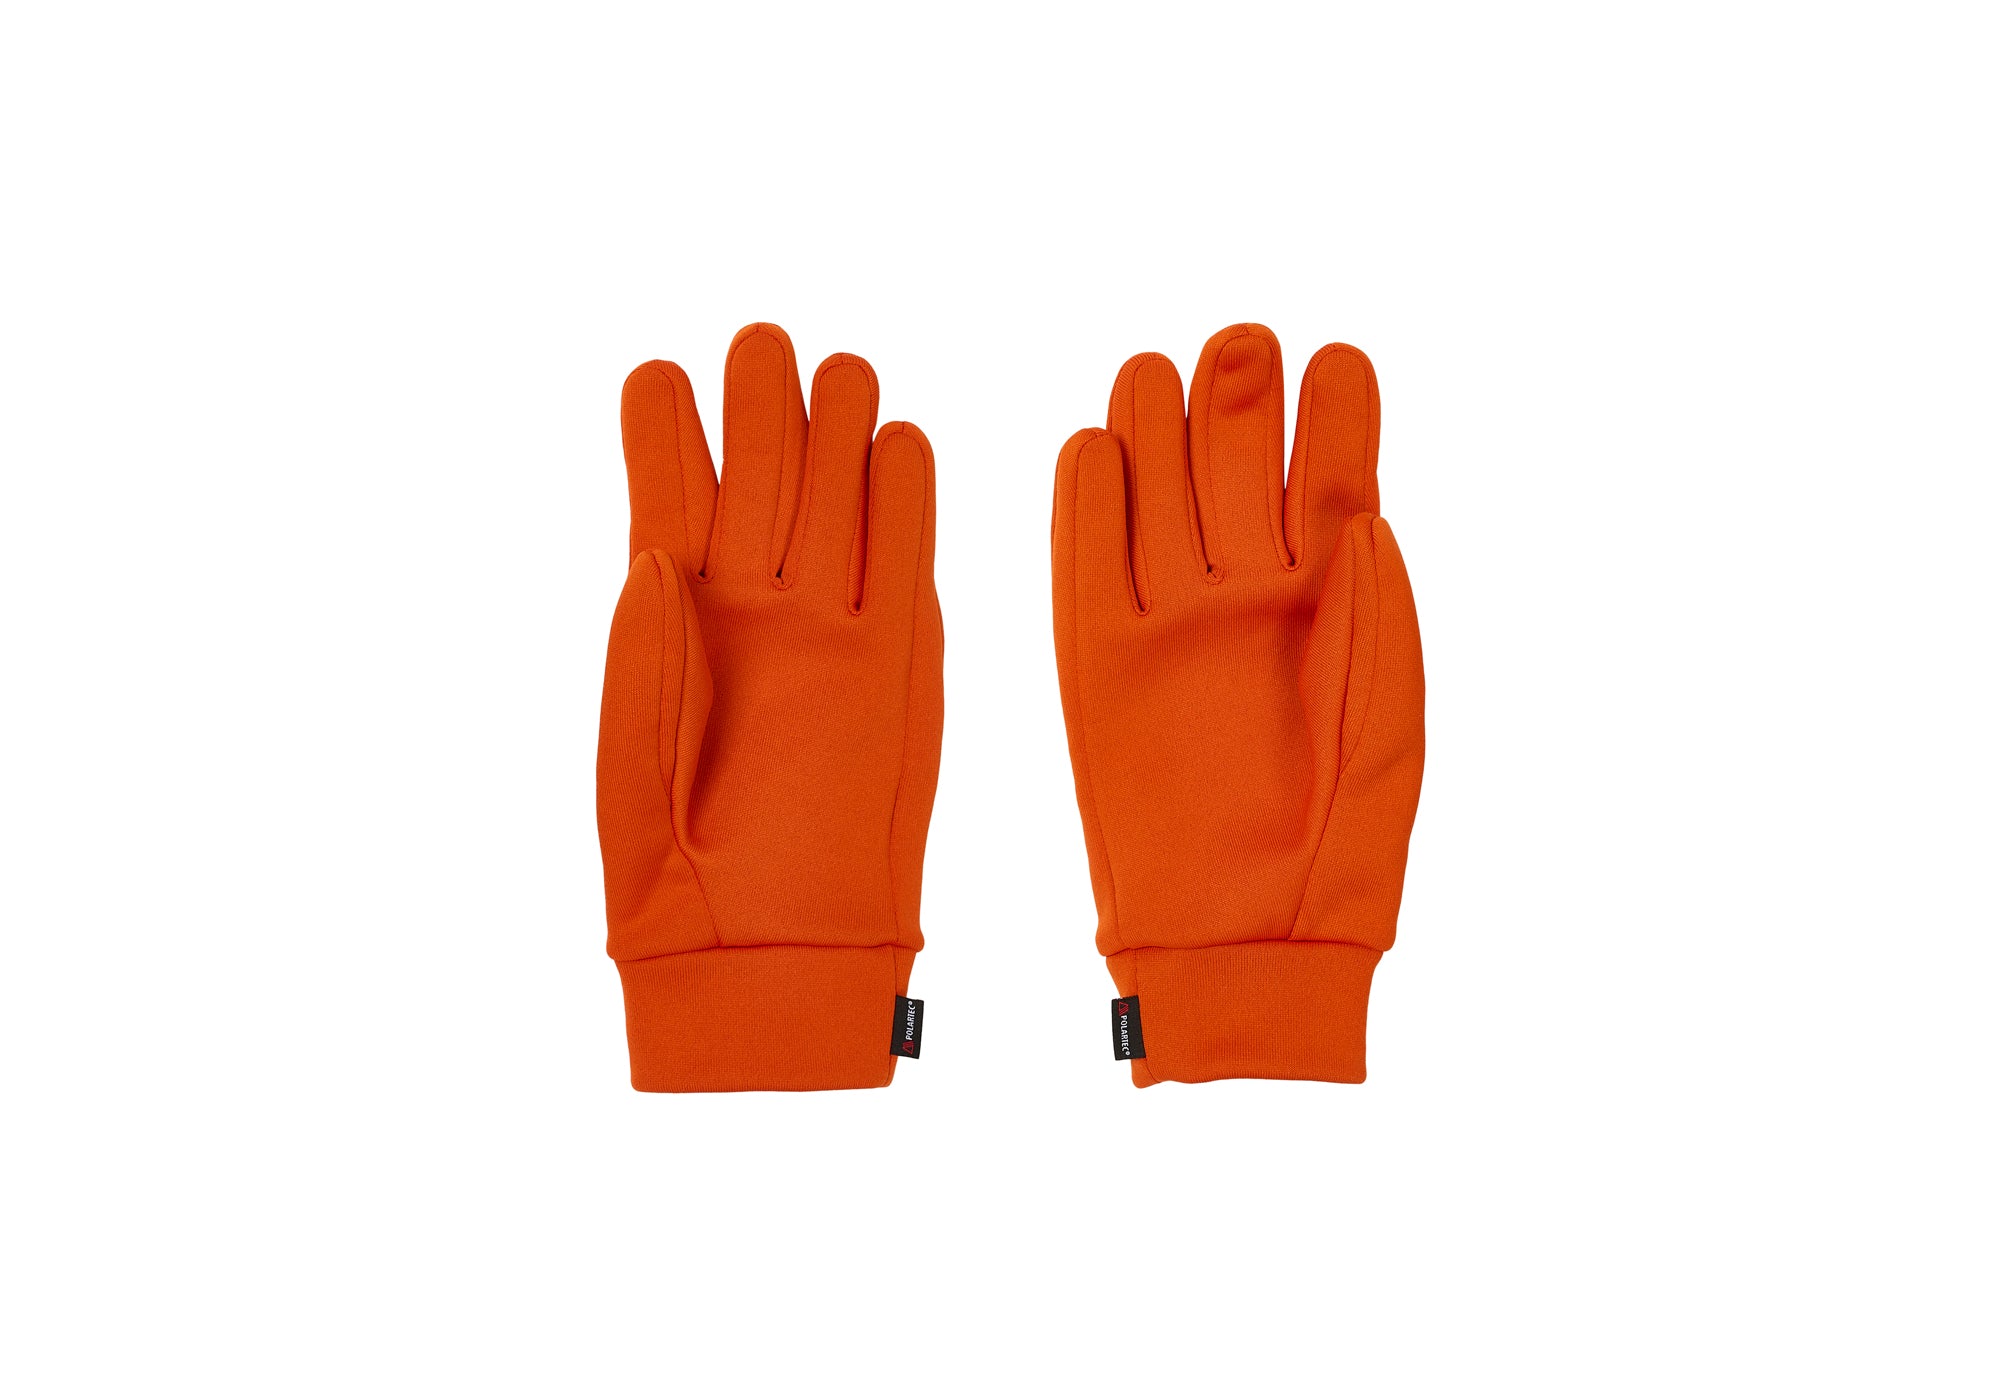 Rab - Power Stretch Contact Gloves - Black – The Brokedown Palace